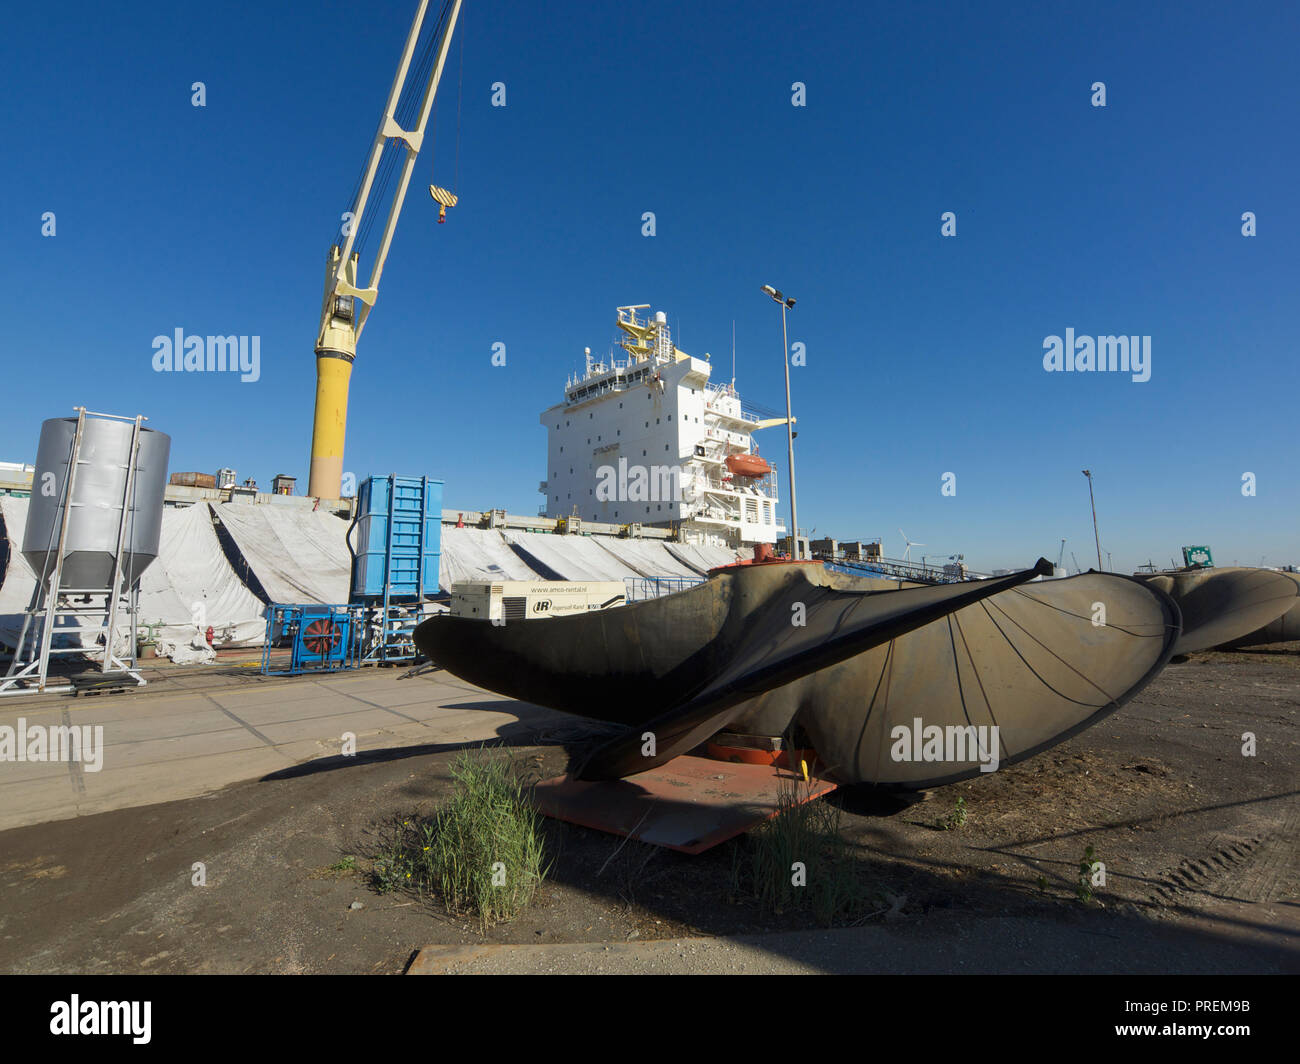 Cargo ship in dry dock for maintenance with large propeller in the foreground, port of Antwerp, Belgium Stock Photo